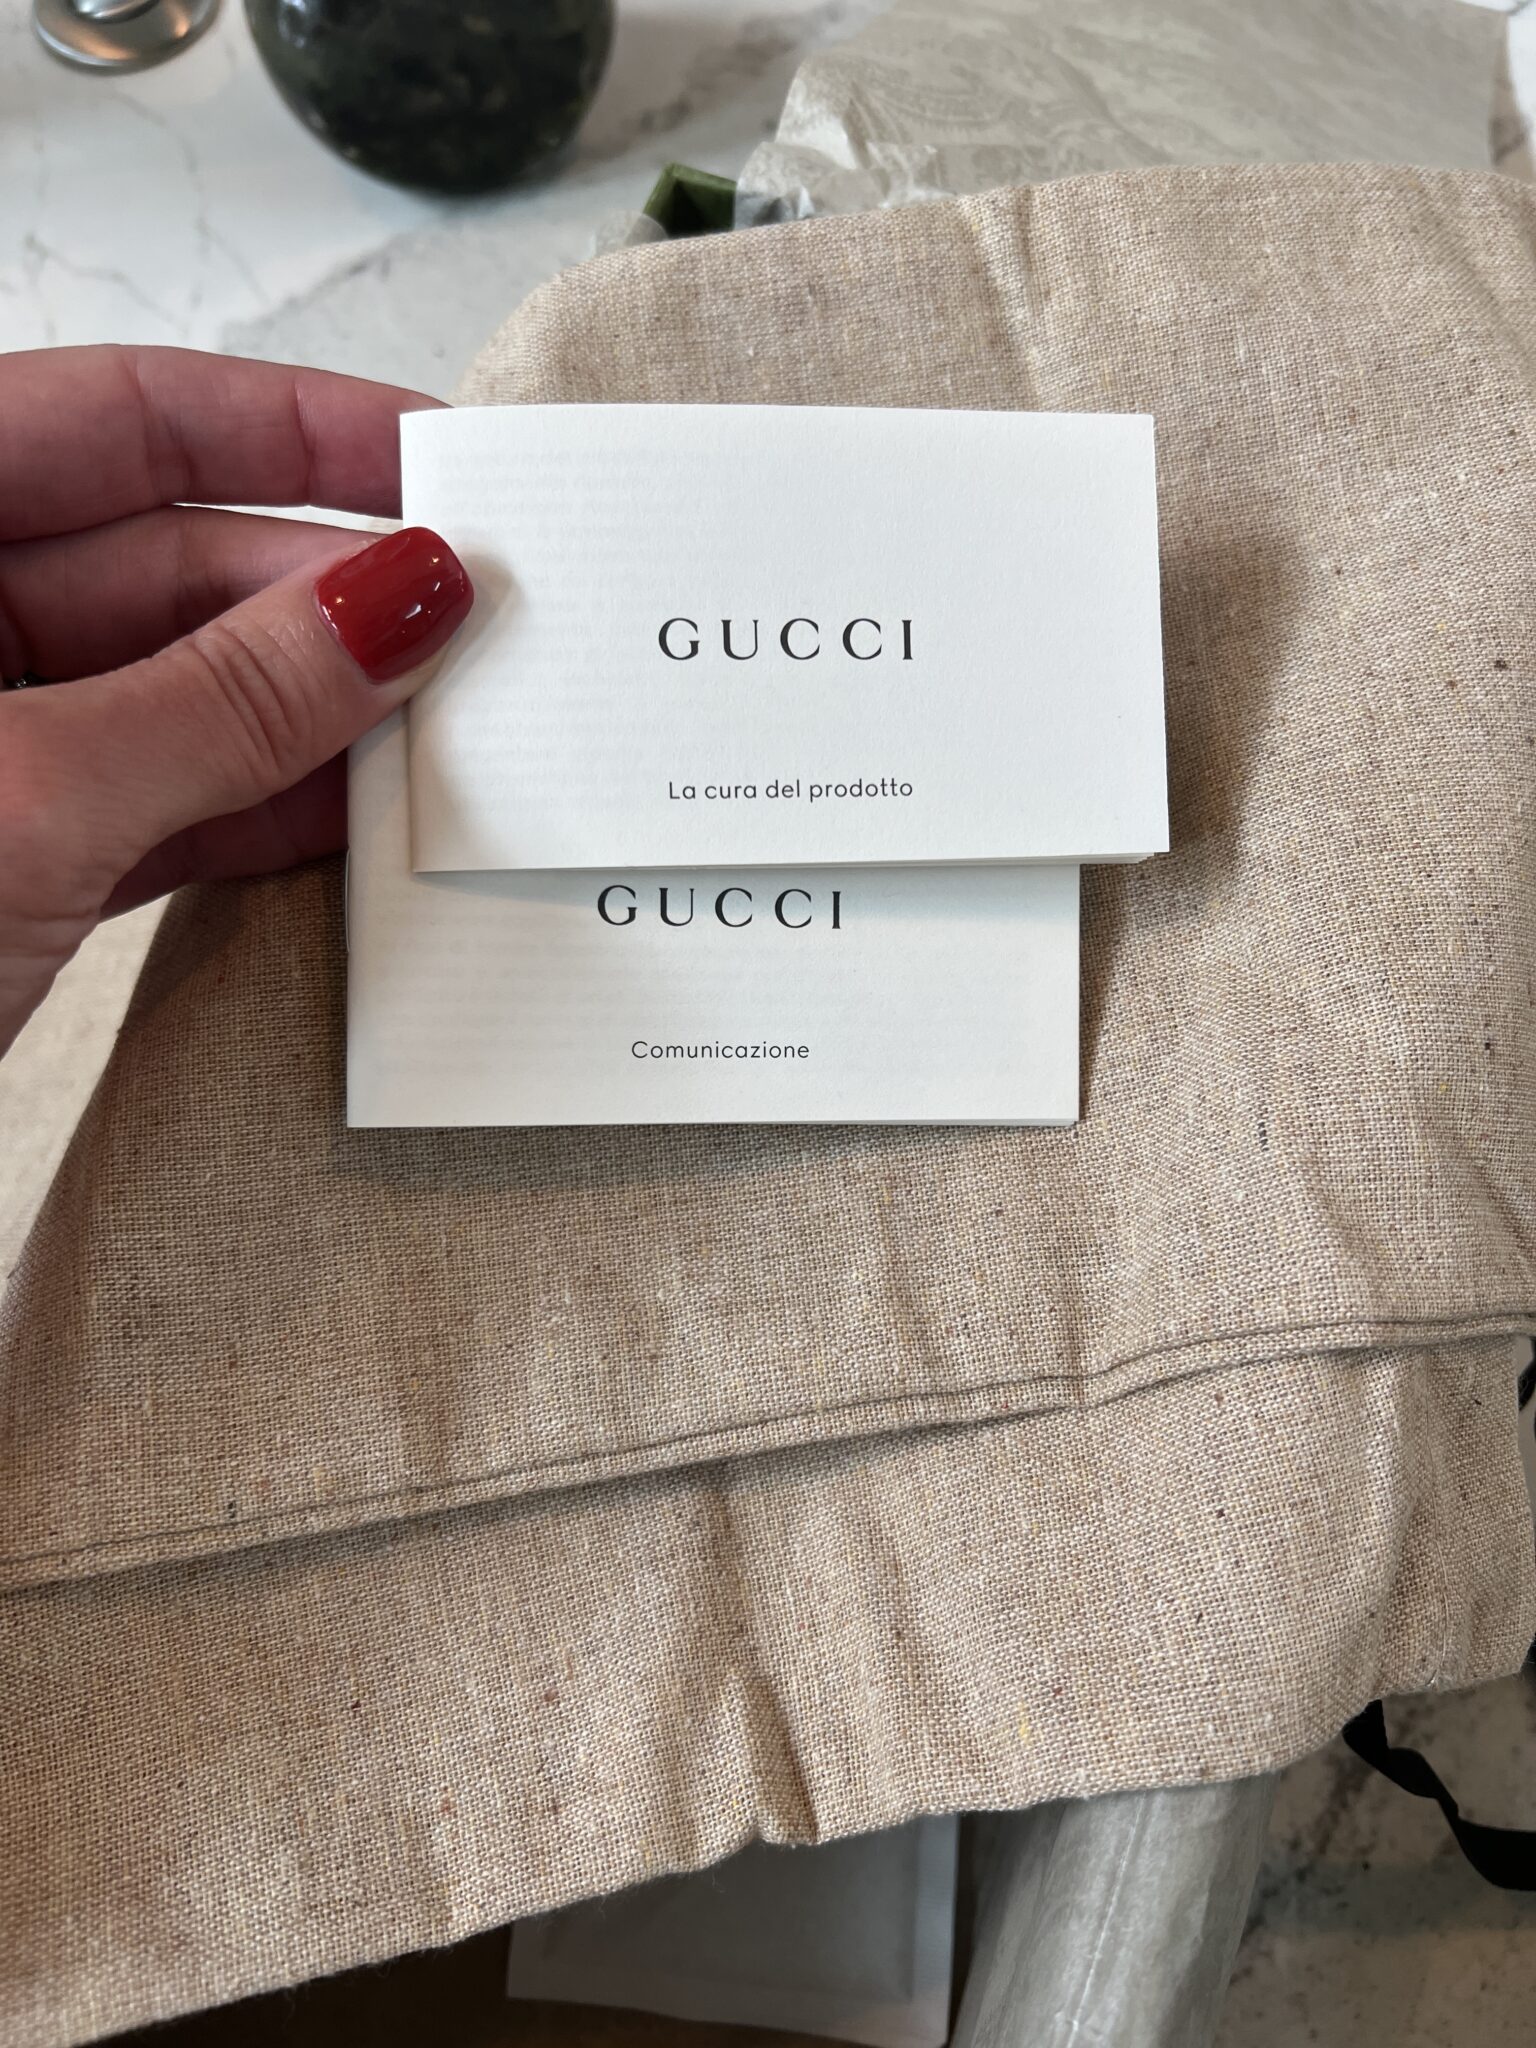 Authenticity paperwork from Gucci